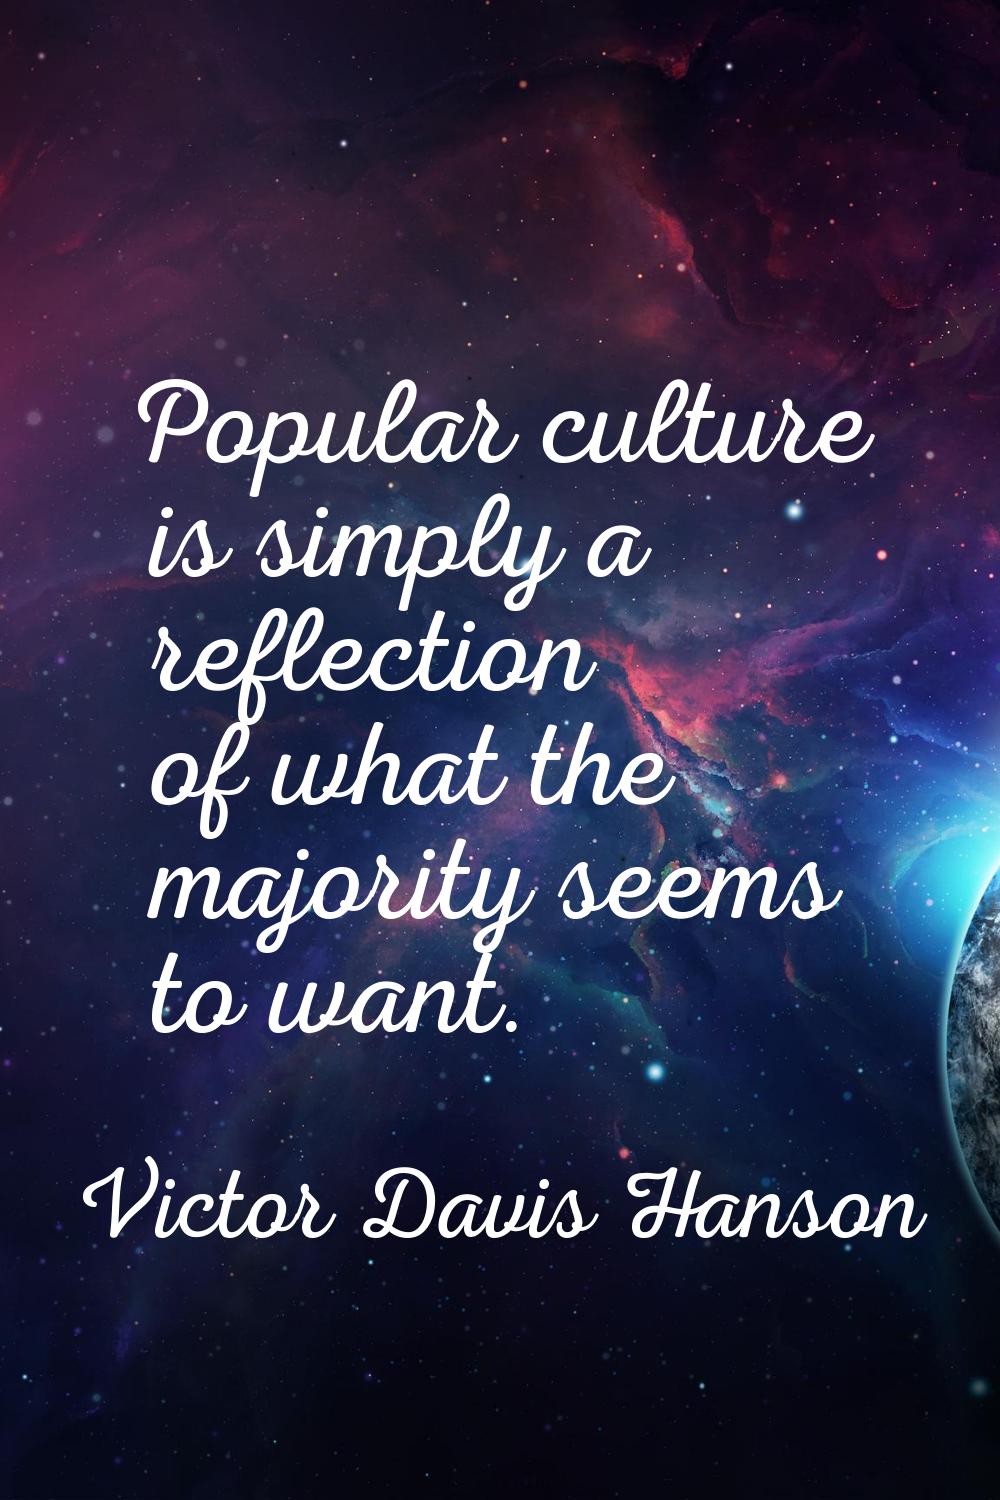 Popular culture is simply a reflection of what the majority seems to want.